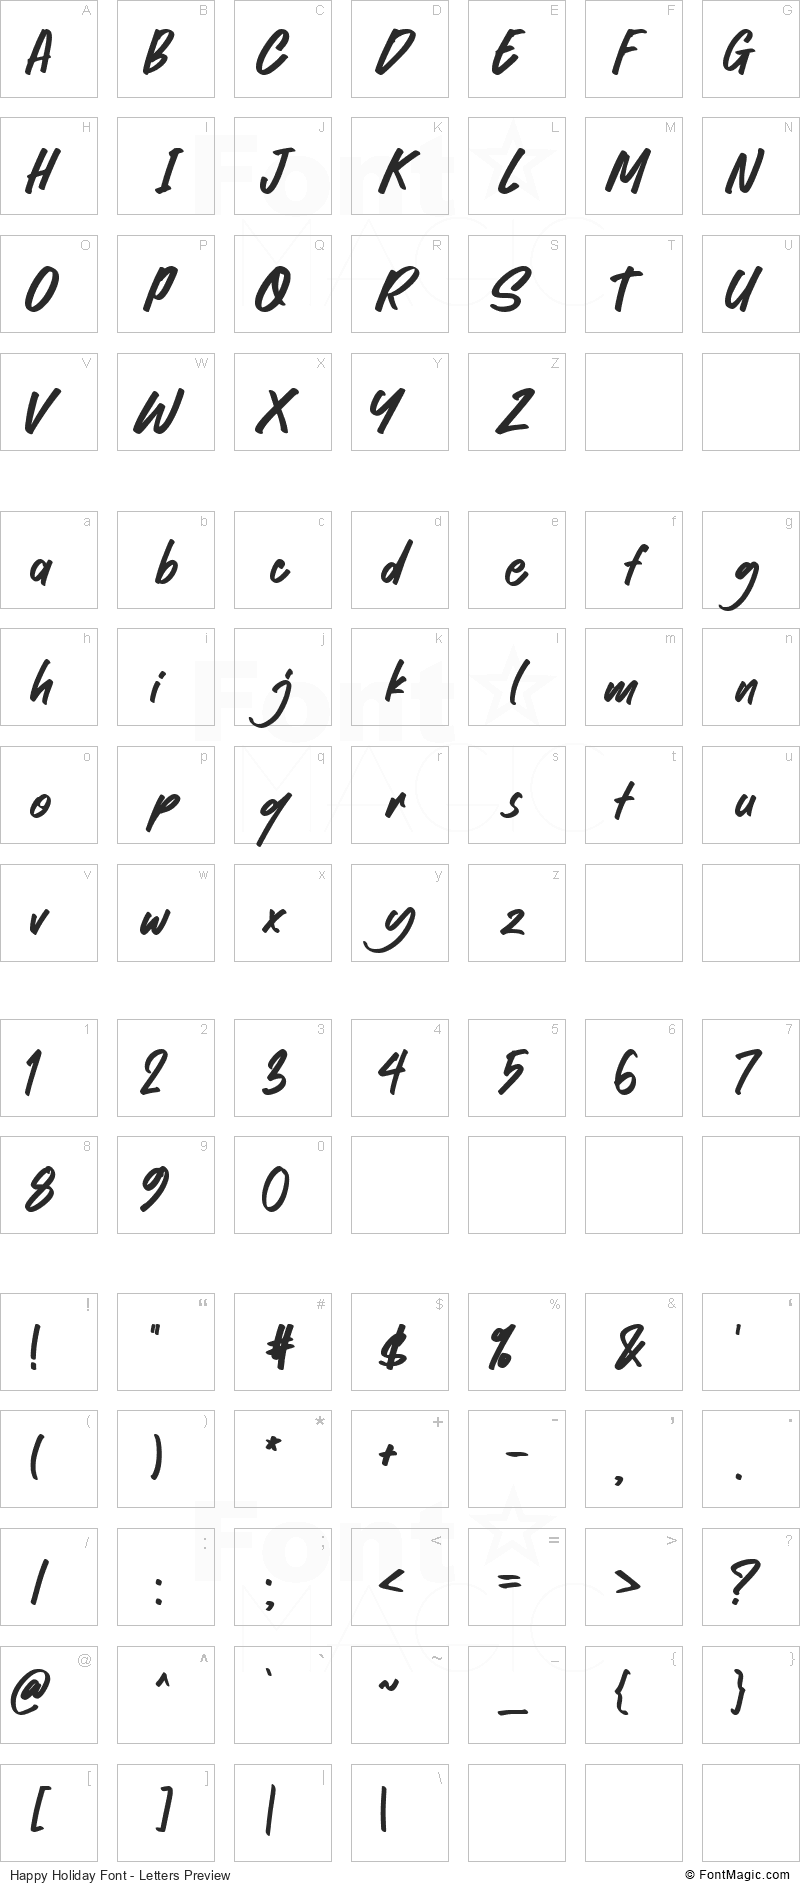 Happy Holiday Font - All Latters Preview Chart